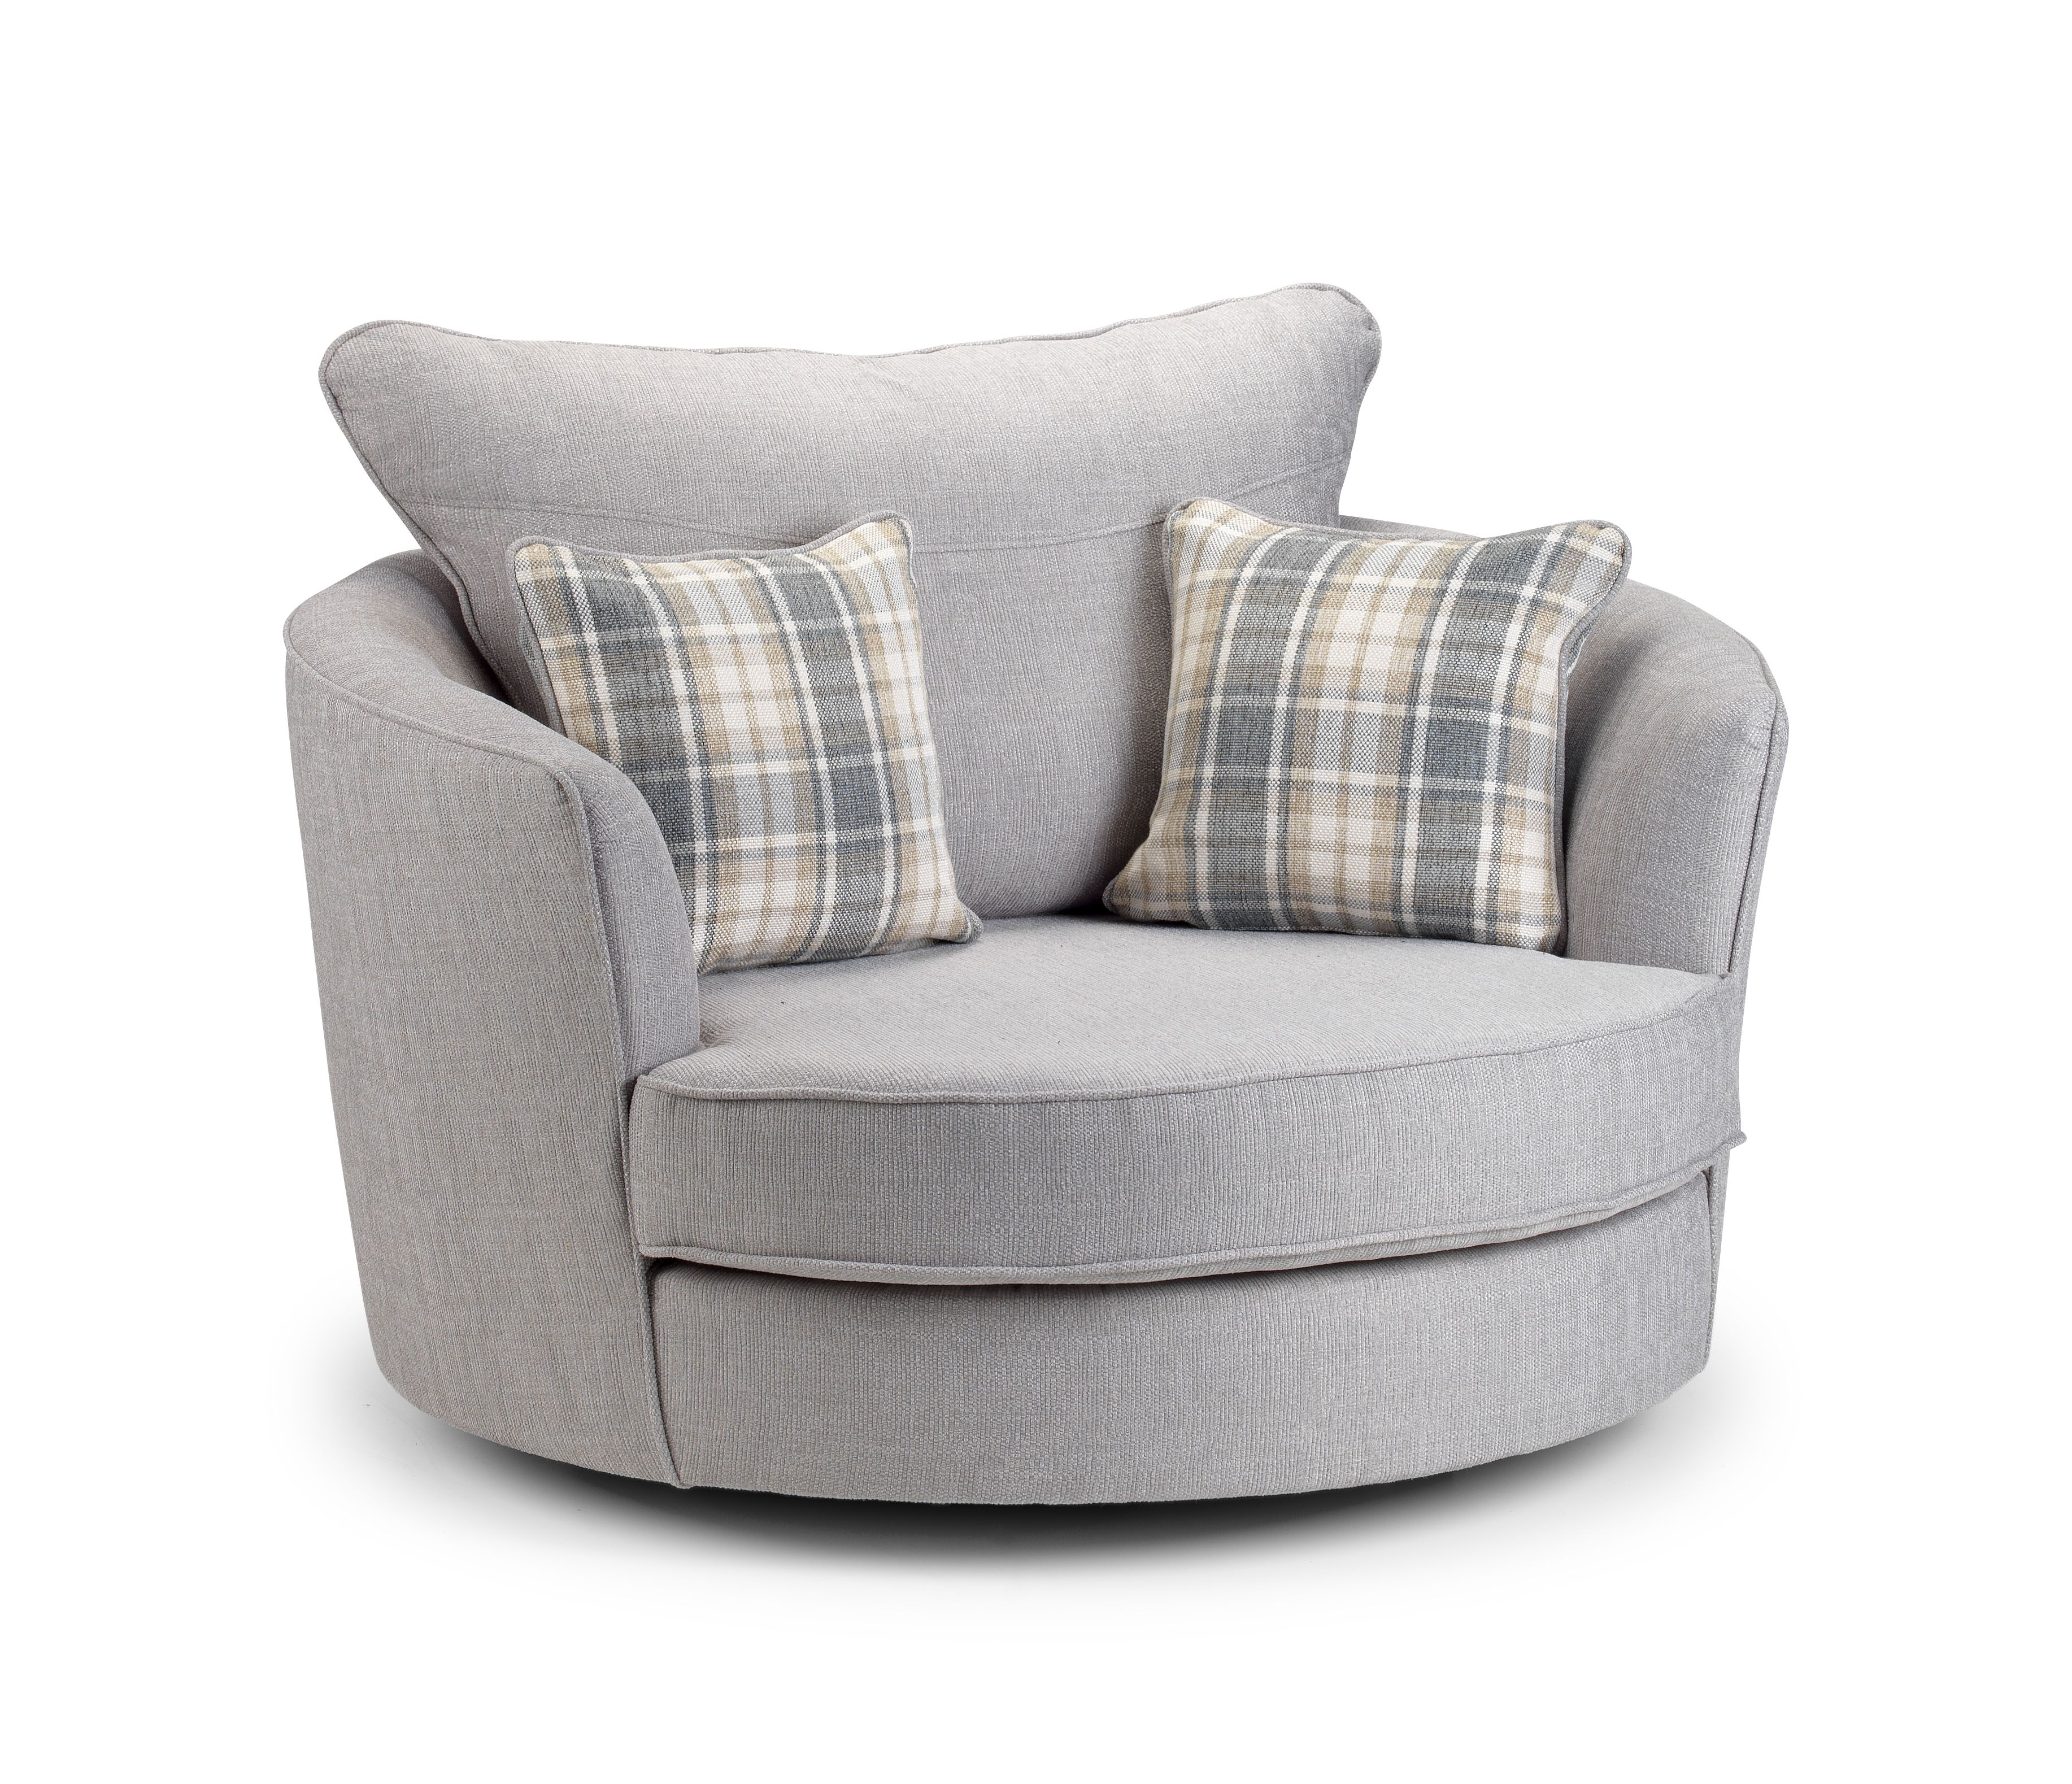 Awesome Round Swivel Sofa Chair Gallery Parabellum Throughout Round Sofa Chair (View 7 of 15)